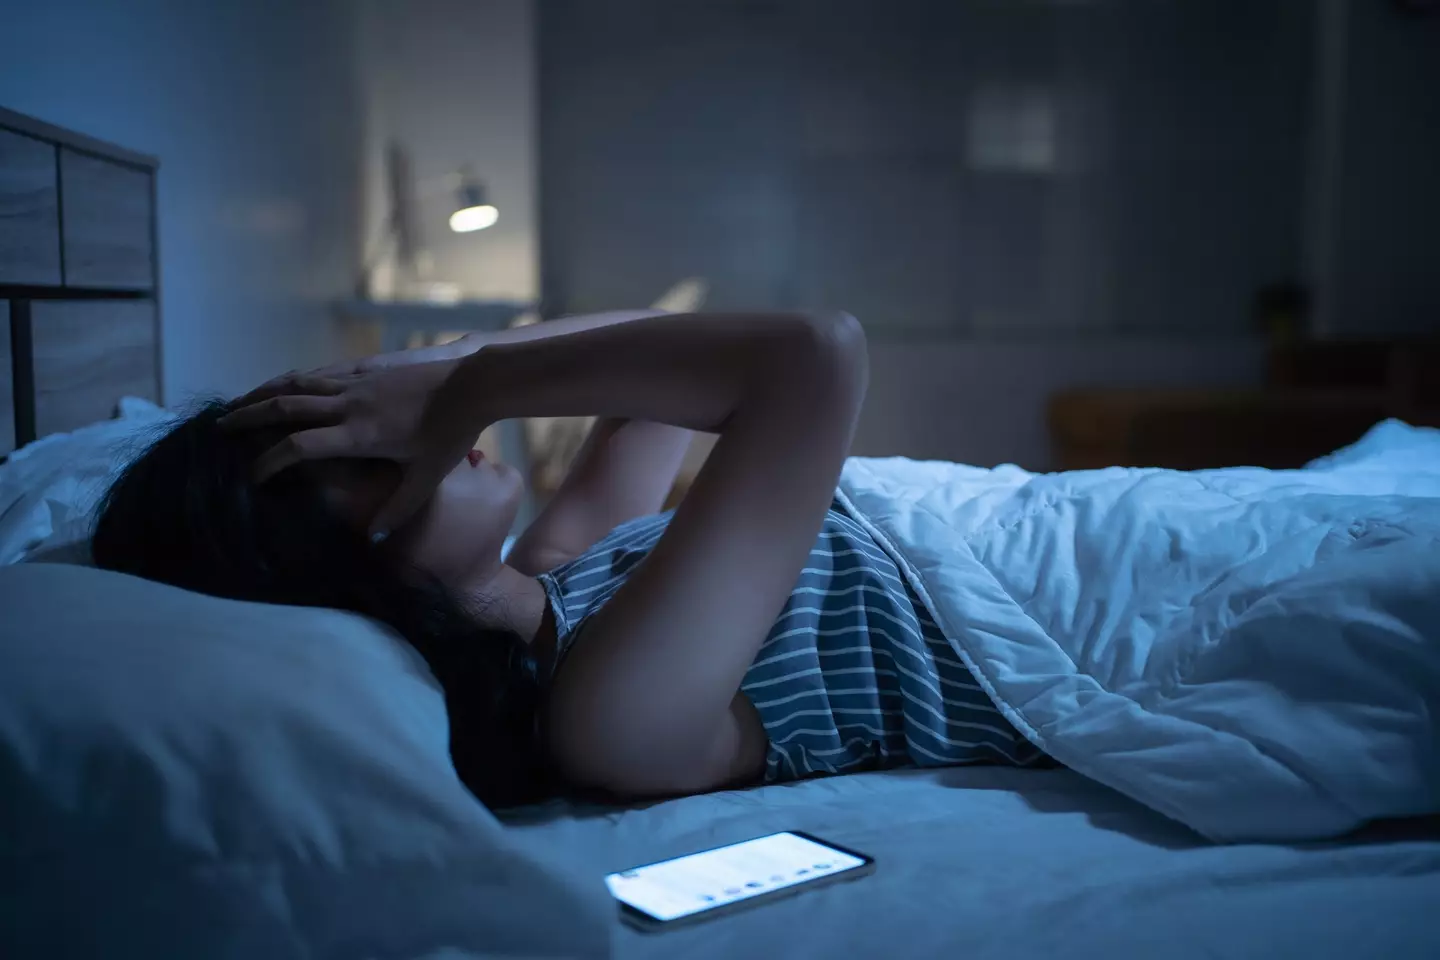 Resist the urge to check your phone in the middle of the night.